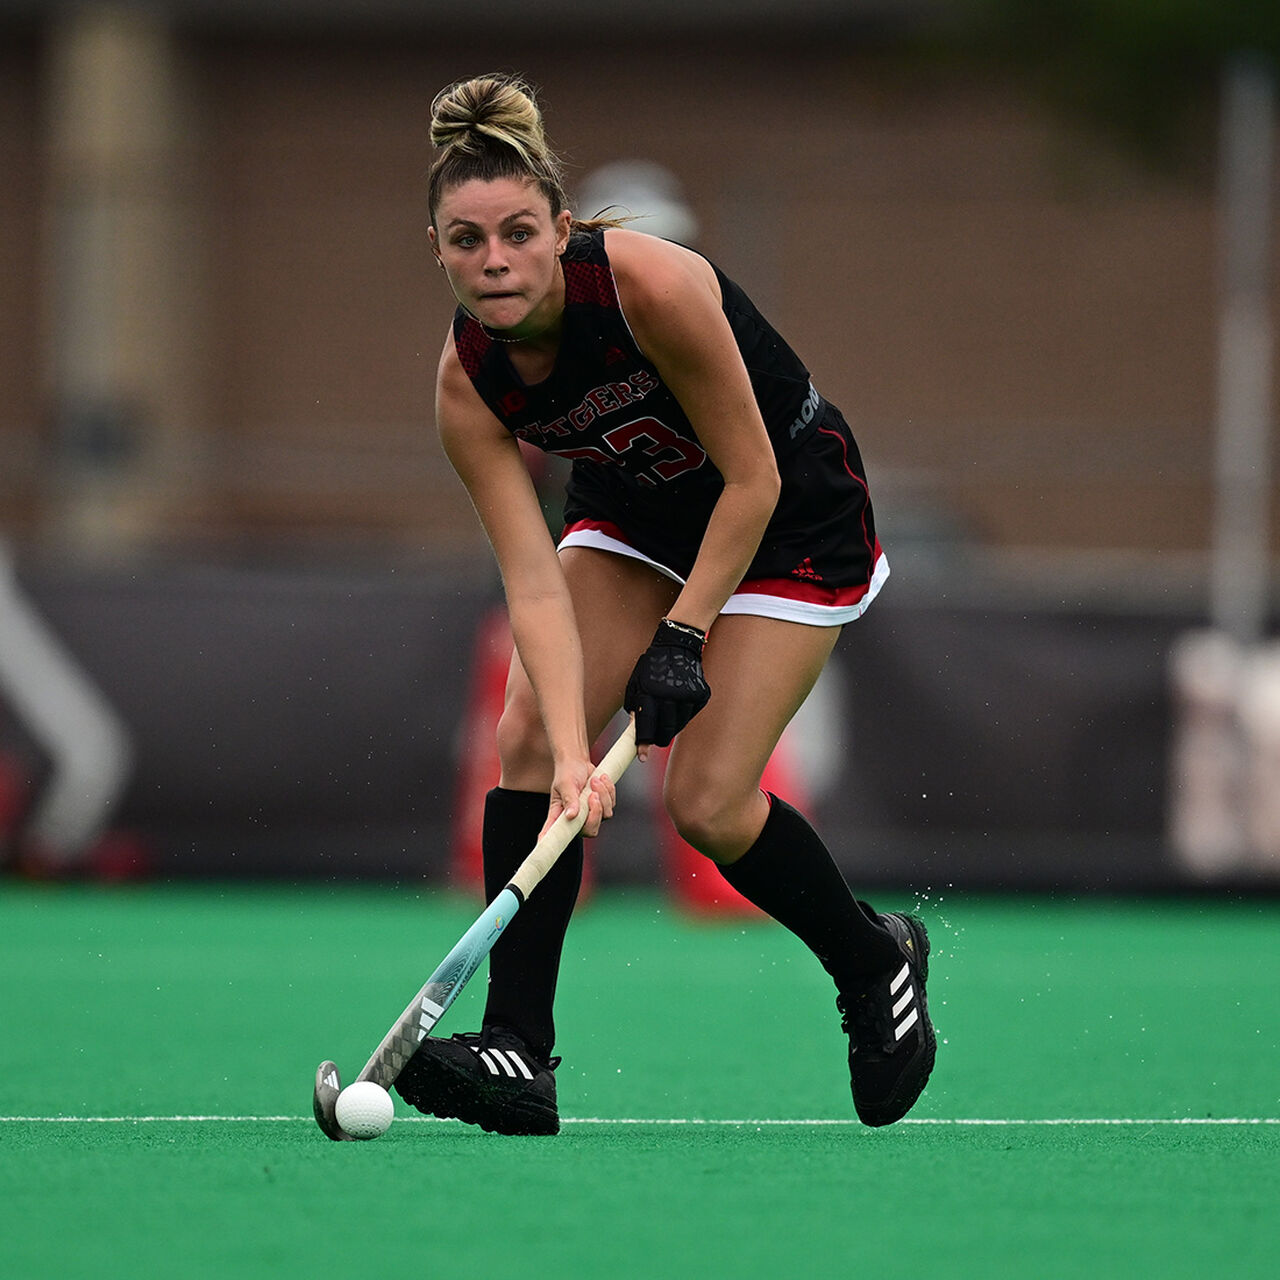 Rutgers field hockey player image number 0